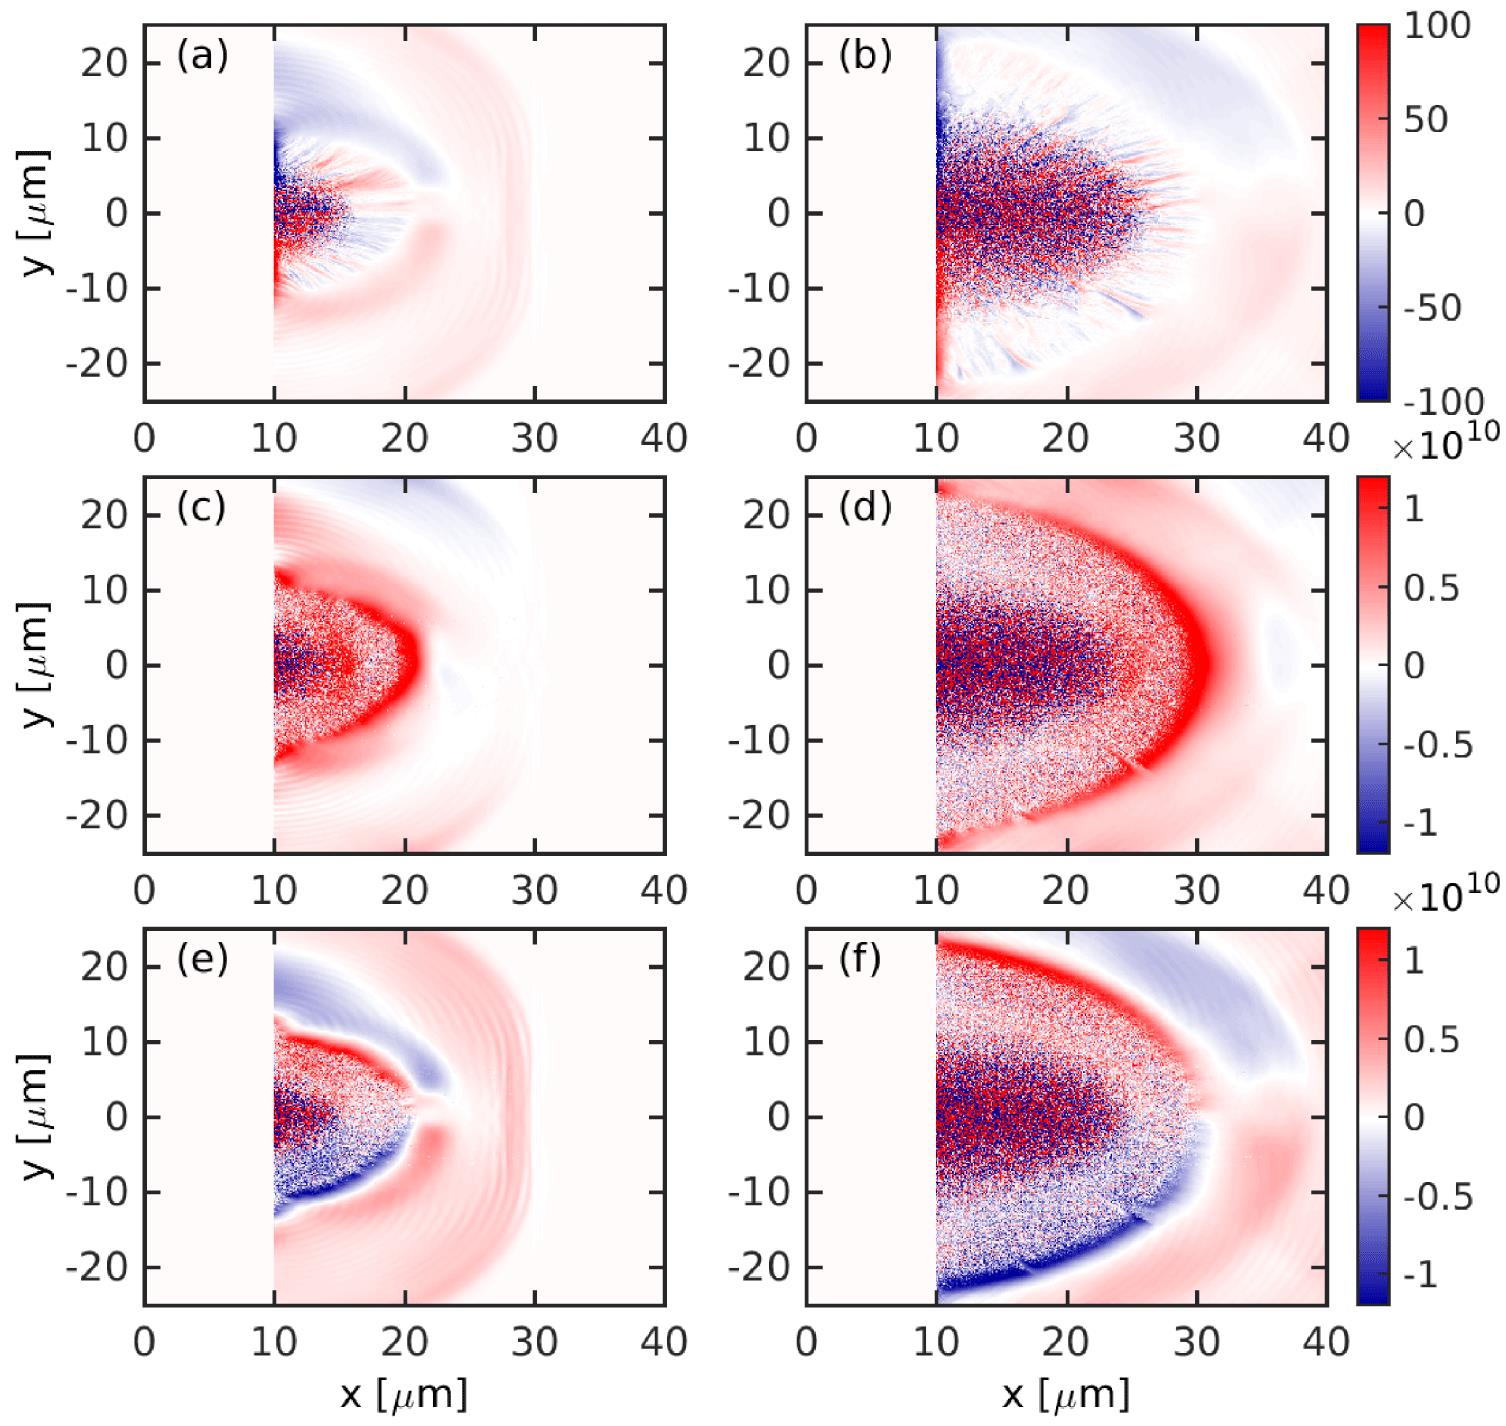 Distributions of the quasi-static magnetic field ($B_{z}$) [(a) and (b)], the longitudinal electrostatic field ($E_{x}$) [(c) and (d)] and the transverse electrostatic field ($E_{y}$) [(e) and (f)] at $t=100~\text{fs}$ [(a), (c) and (e)] and 150 fs [(b), (d), and (f)]. The fields are averaged over two laser cycles and the fields in front of the solid target ($z) are not shown for clarity. The magnetic field and electric field are in units of tesla and $\text{V}/\text{m}$, respectively.